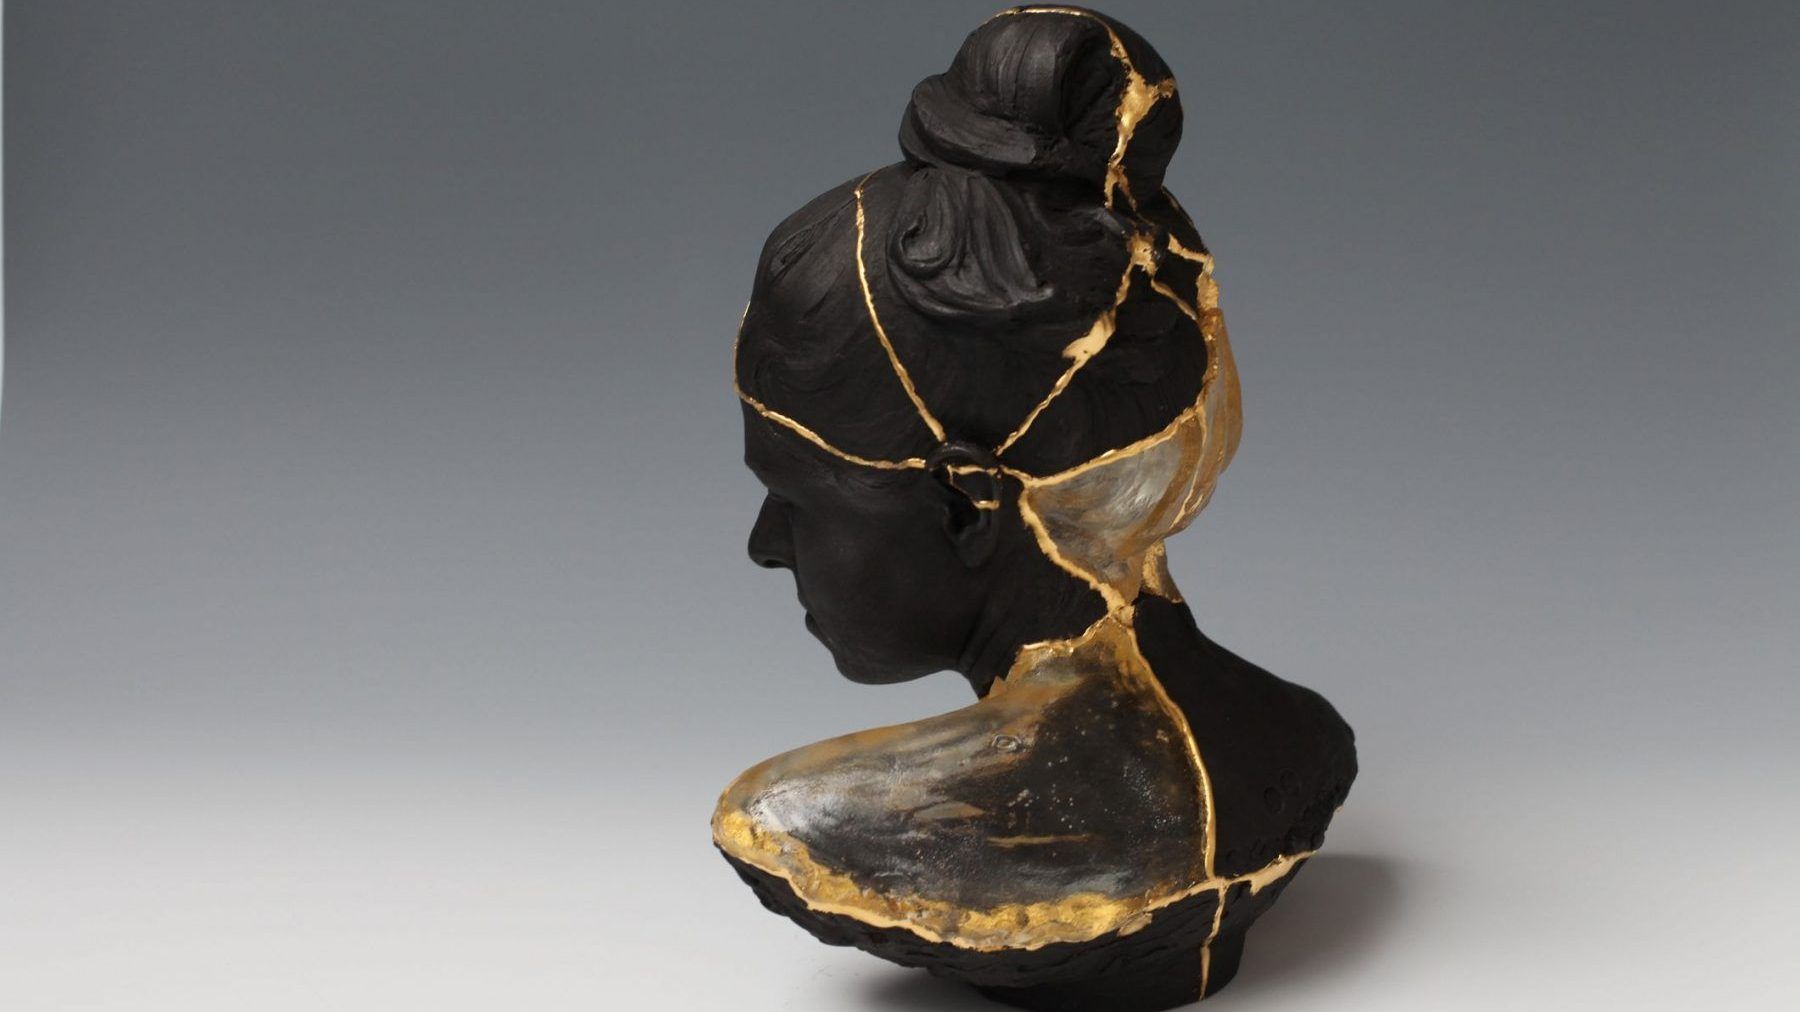 Yollanda Zhang compares her experience with bipolar disorder to the Japanese art of Kintsugi, which repairs broken ceramics using gold. "It’s a metaphor for how we can heal and grow stronger after experiencing hardship," she says. GETTY